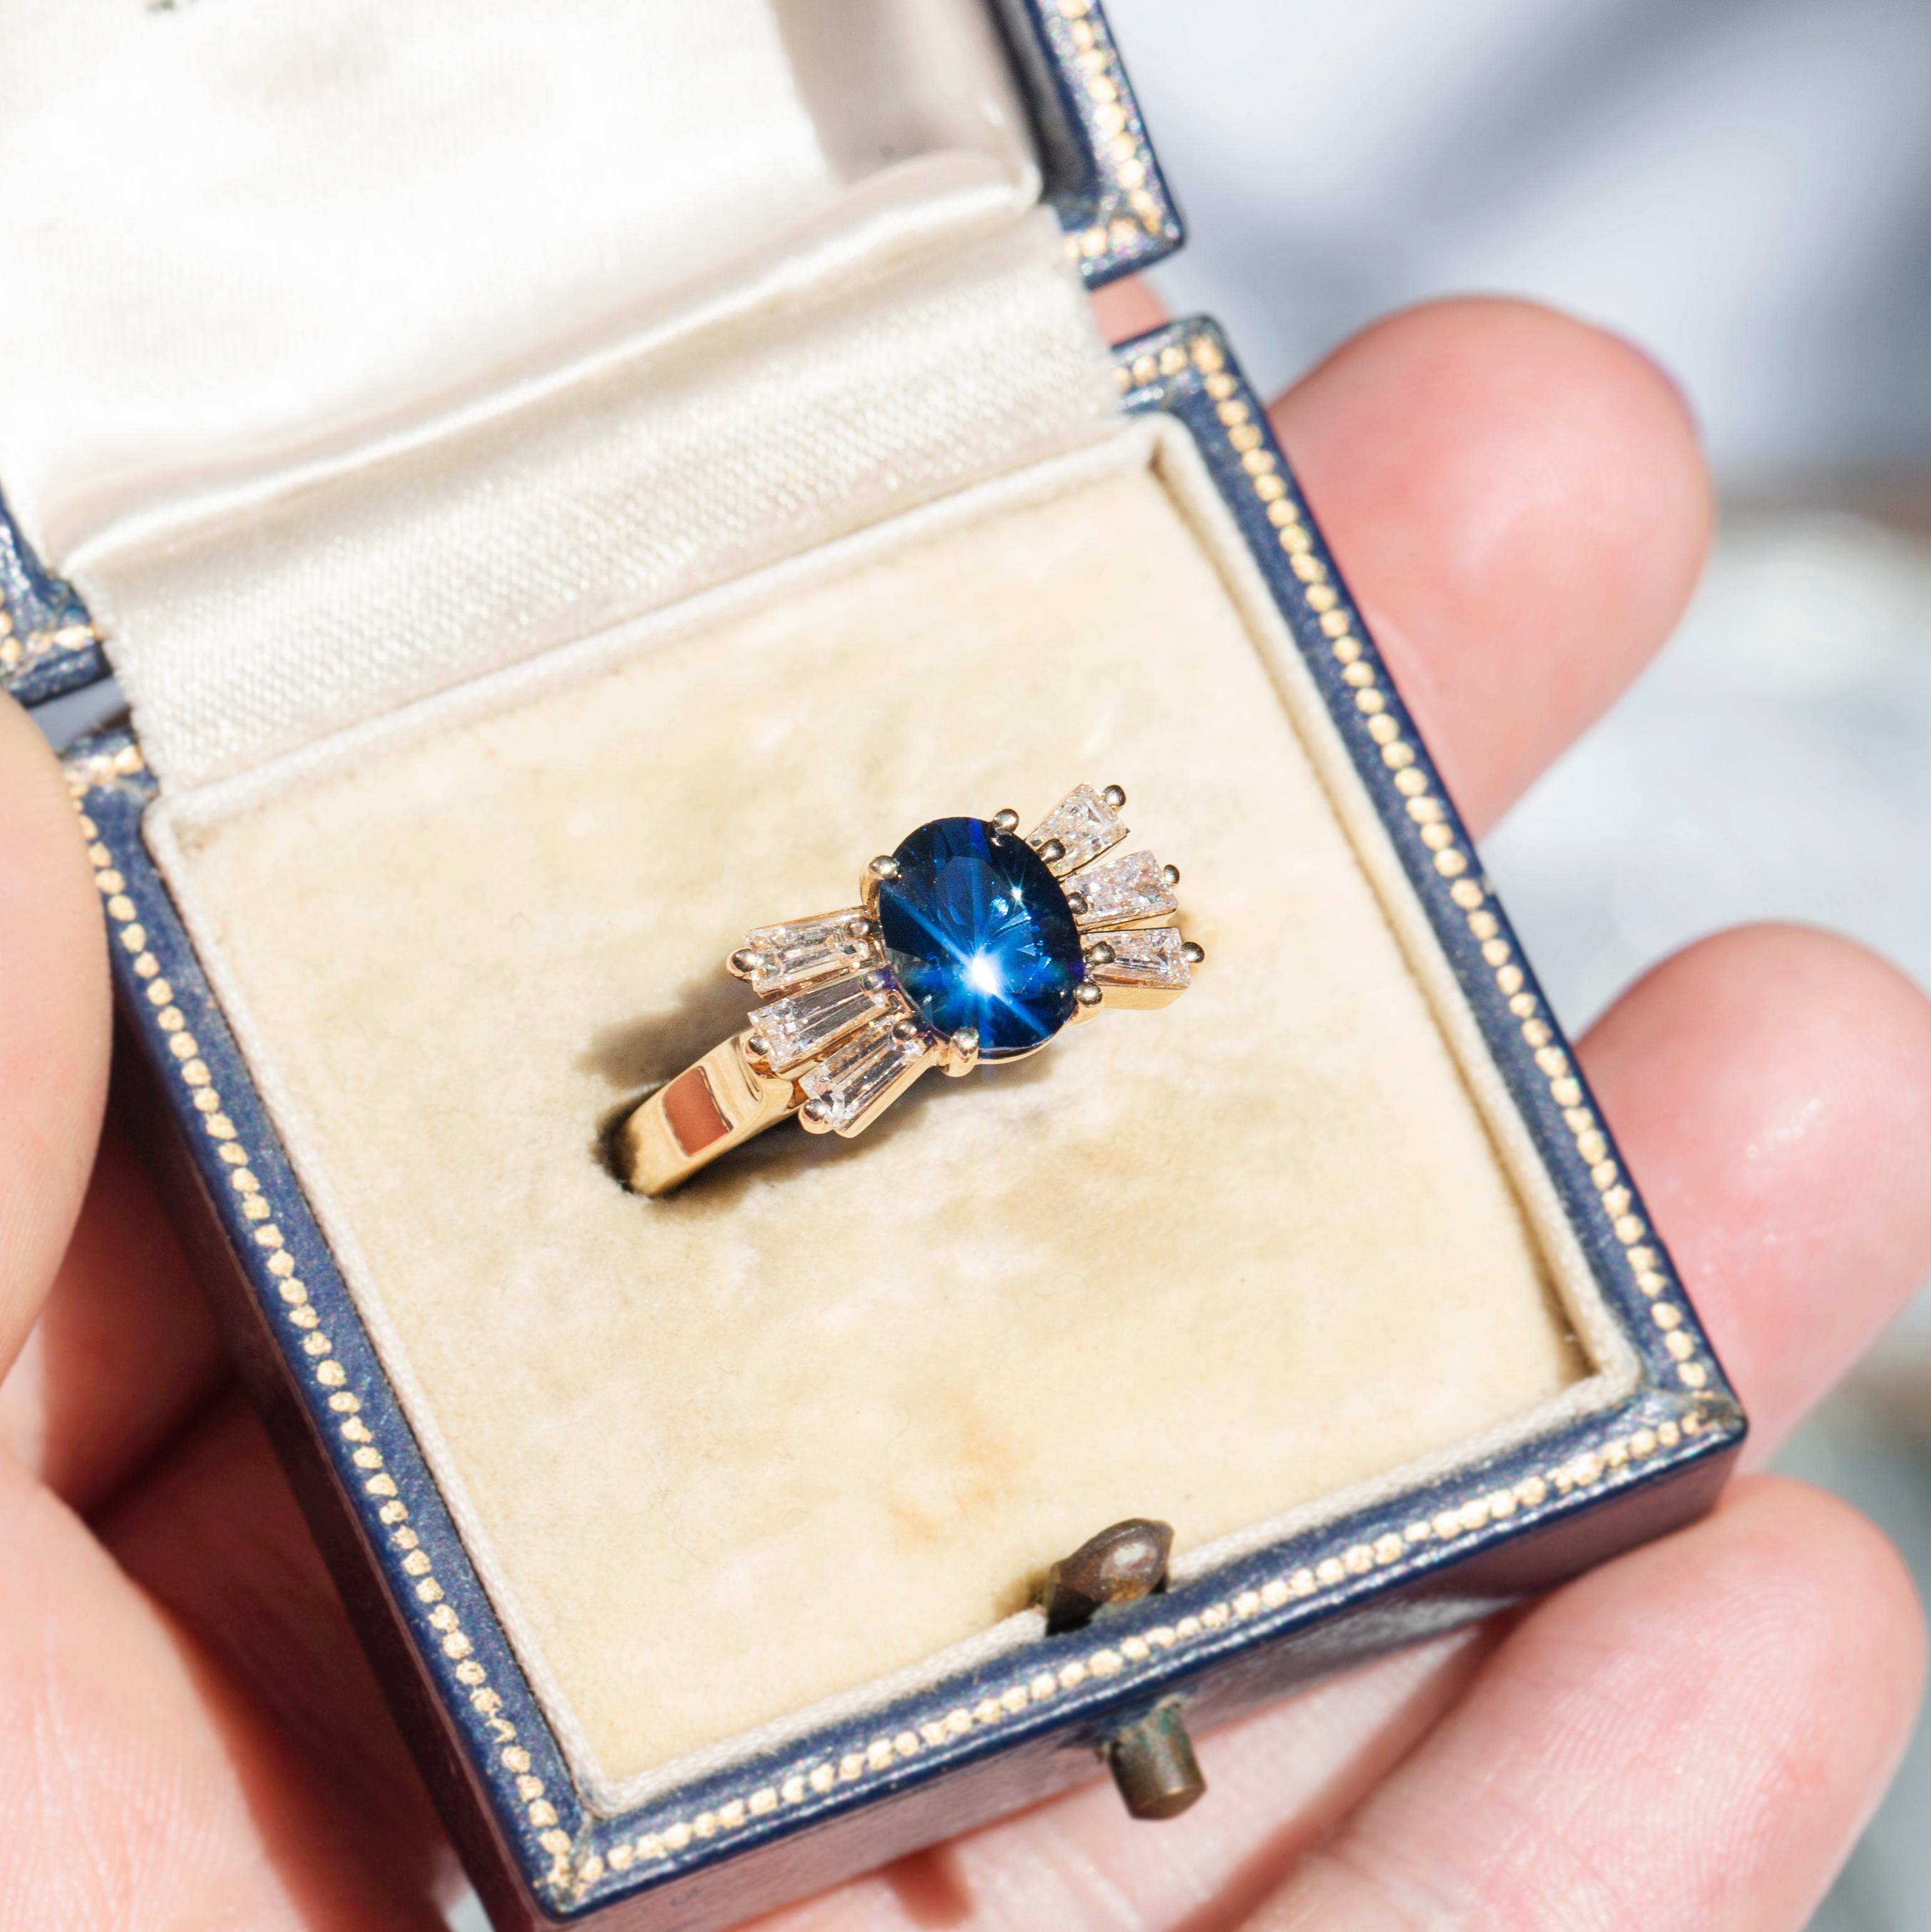 Vintage Circa 1980s 1.78 Carat Sapphire & Baguette Diamond Ring 18ct Yellow Gold For Sale 6